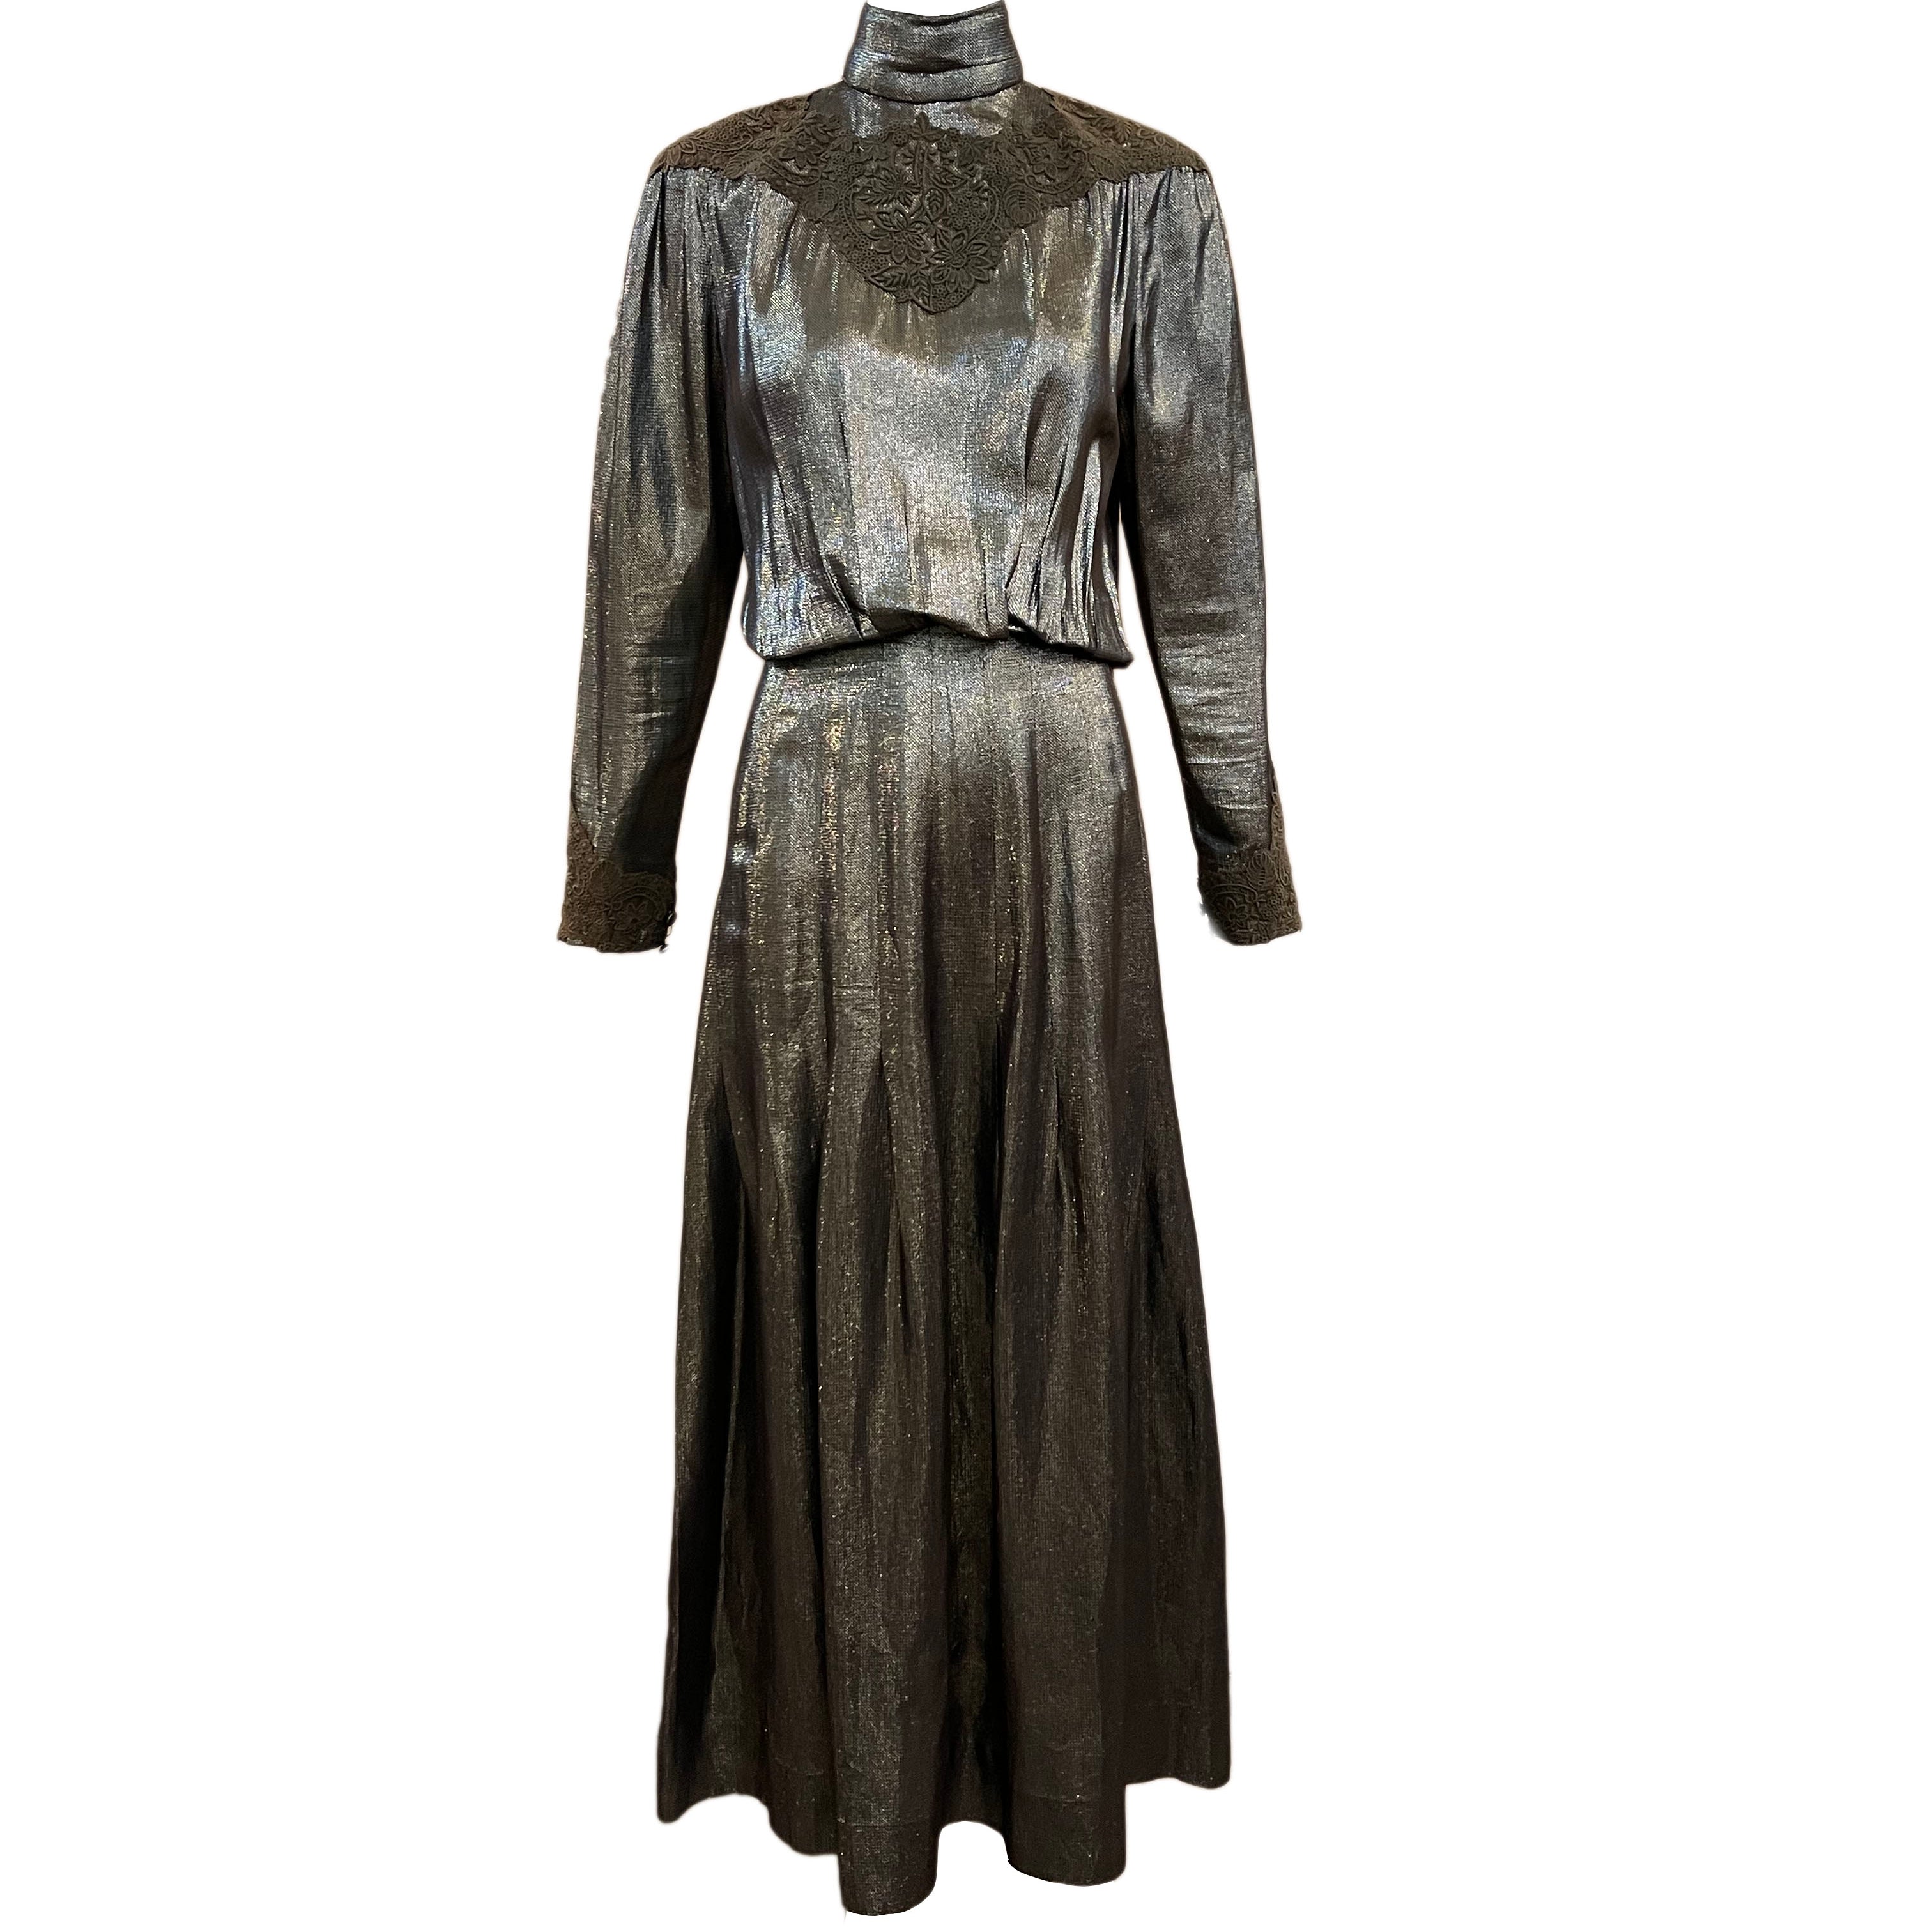 Chloe Early 1980s Metallic Neo Victorian Dress FRONT 1 of 7